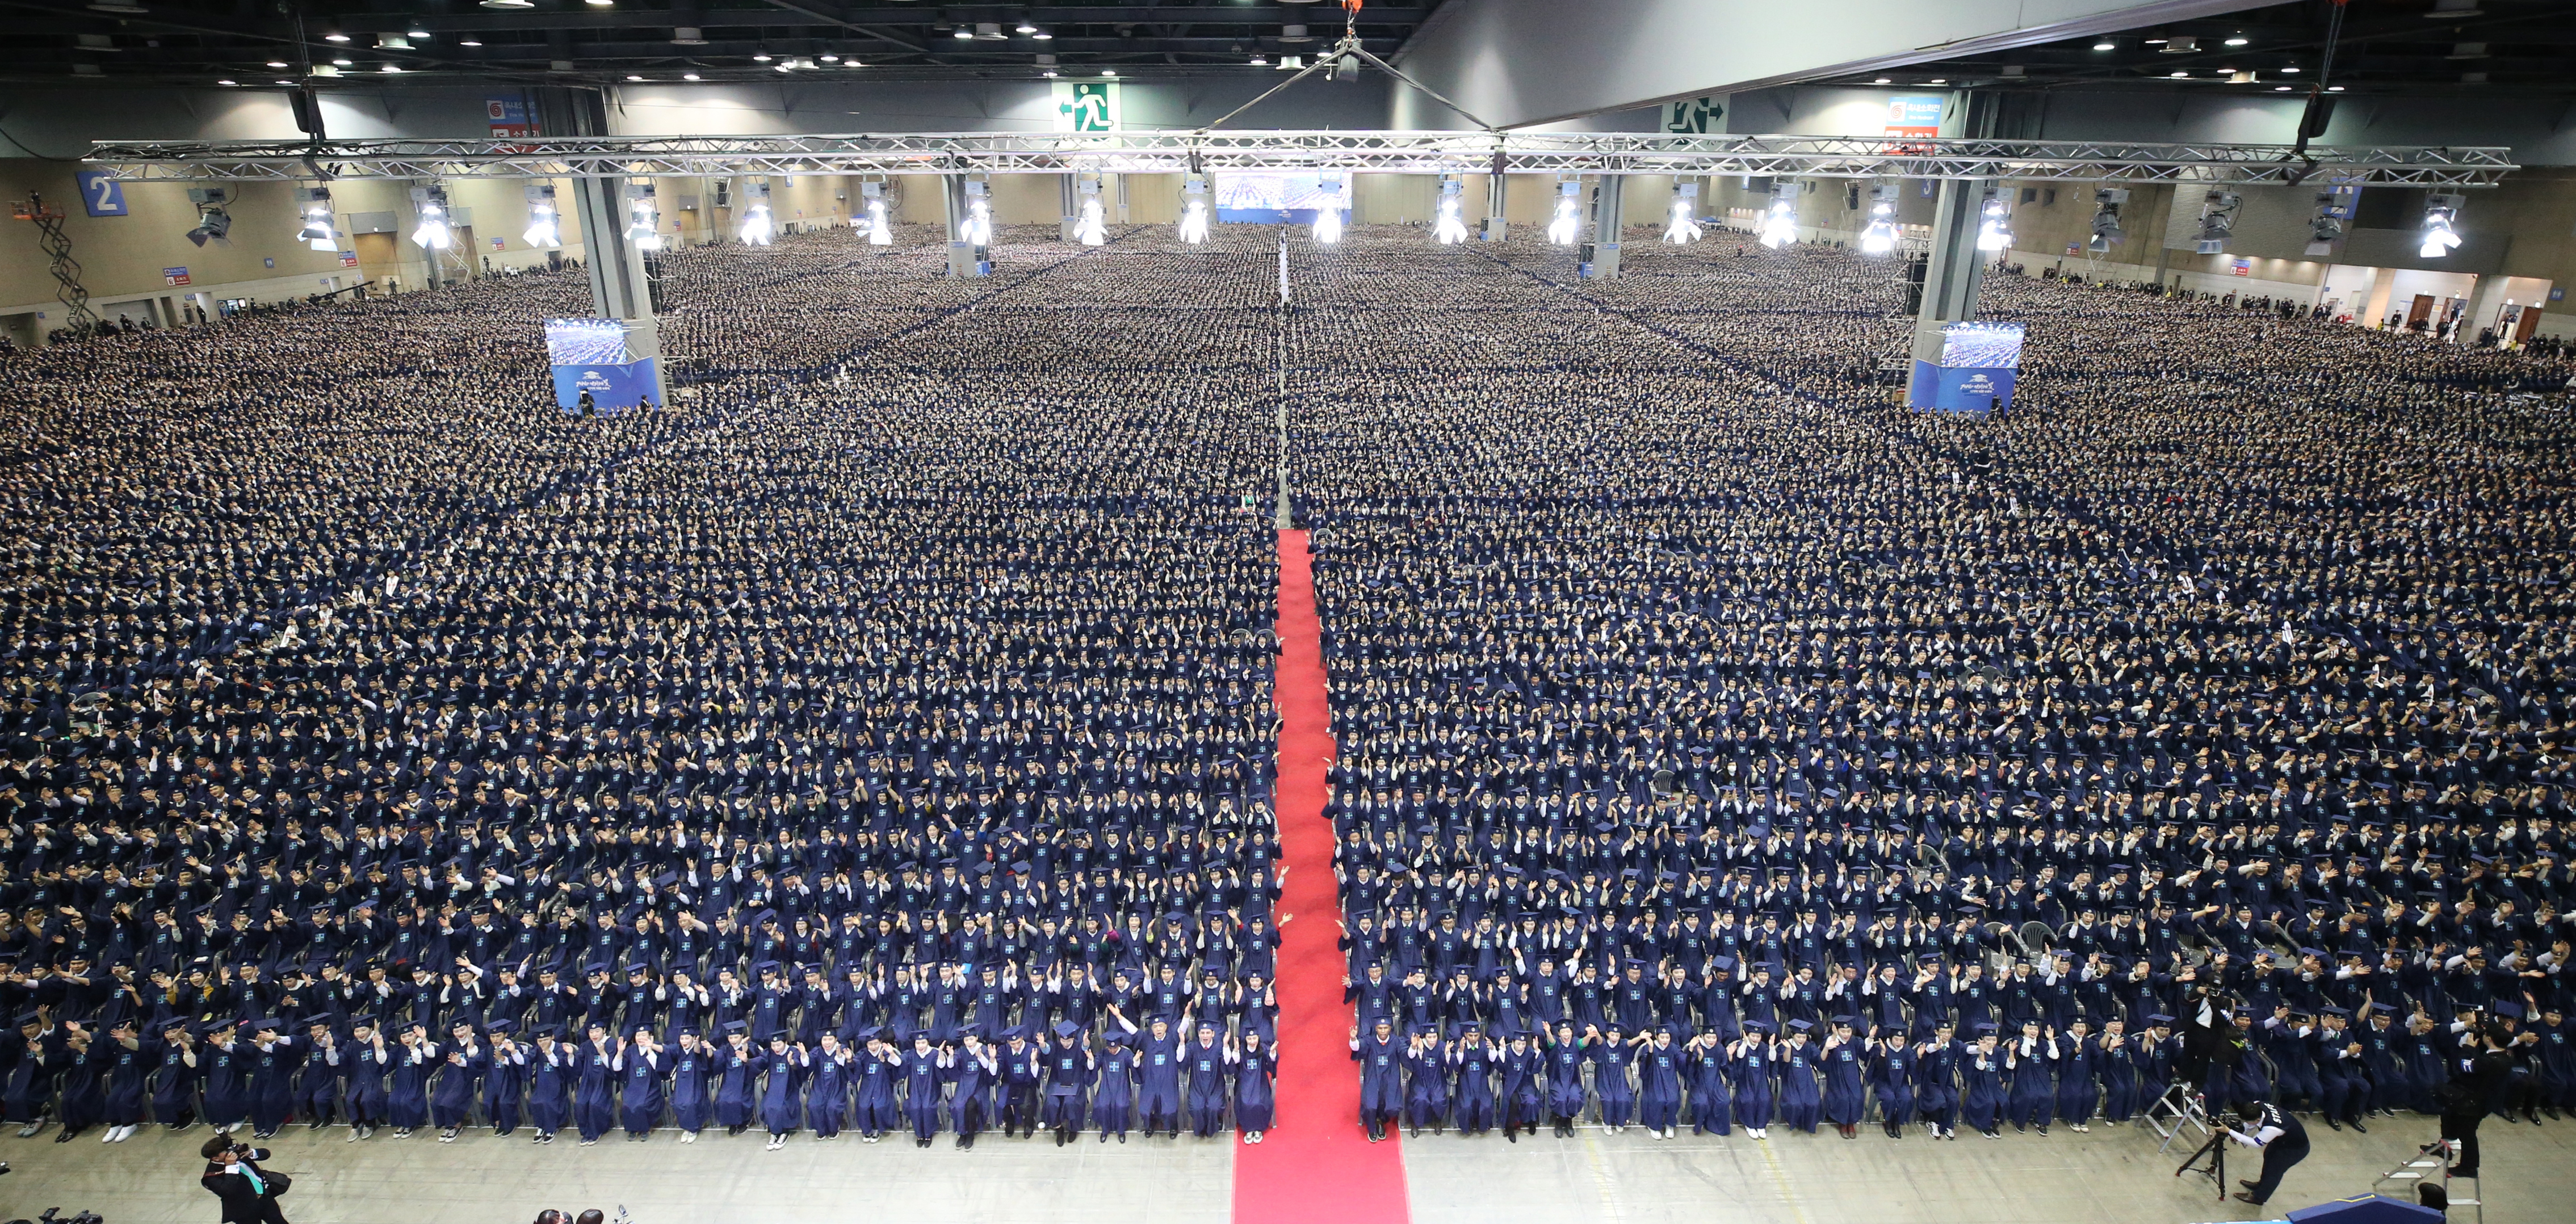 100,000 Graduation Ceremony of Shincheonji Theology Center Held over 112 countries